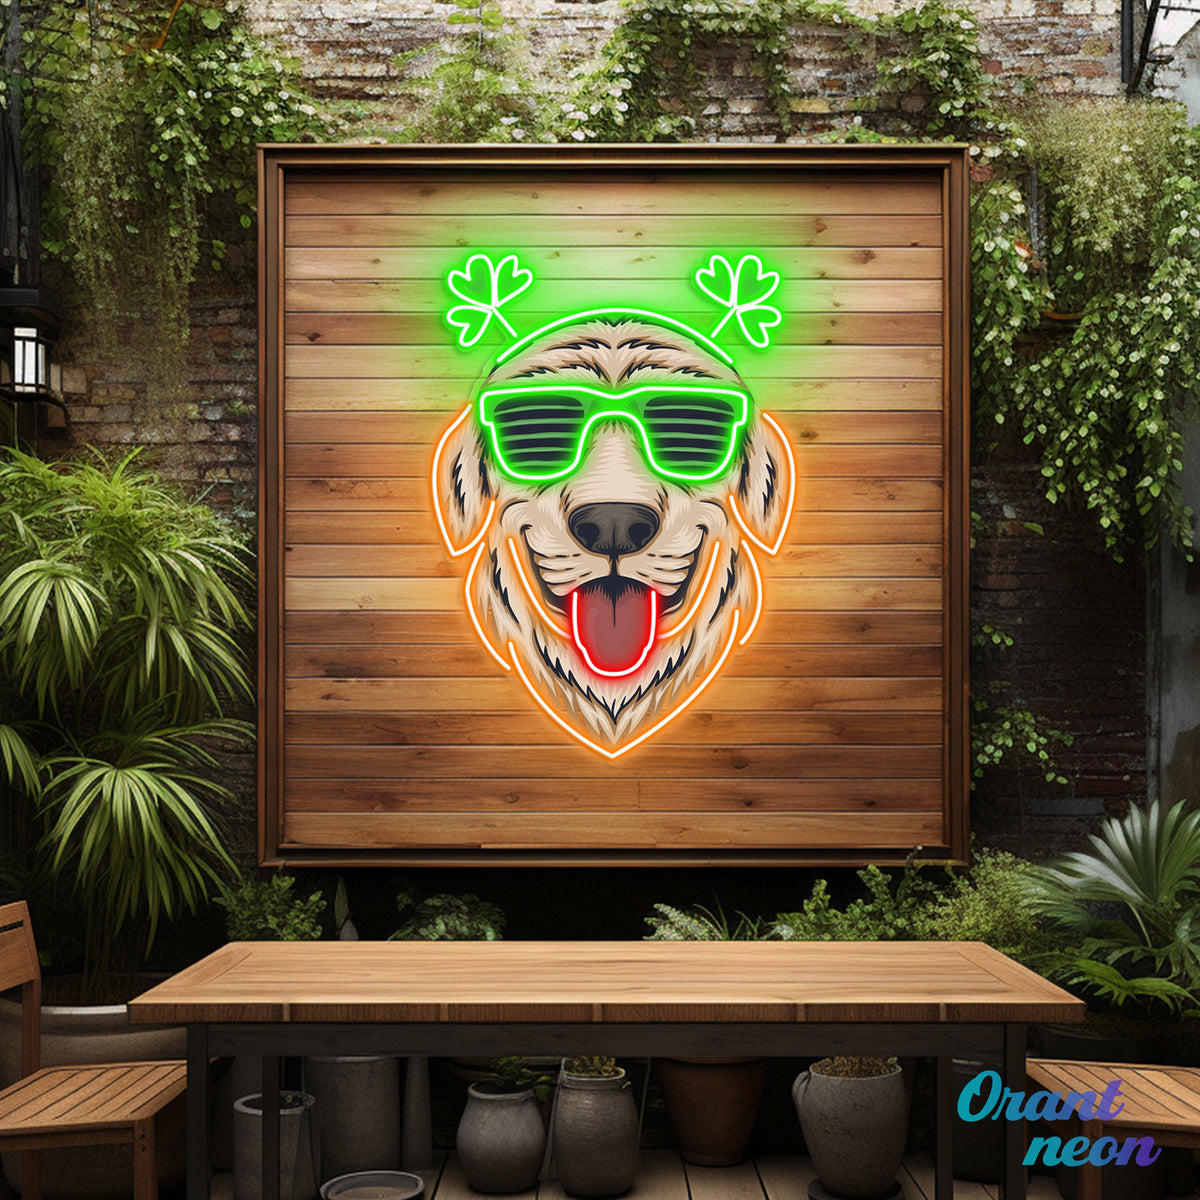 Patrick's Day Cool Dog Wearing Glasses and Smile Led Neon Acrylic Artwork